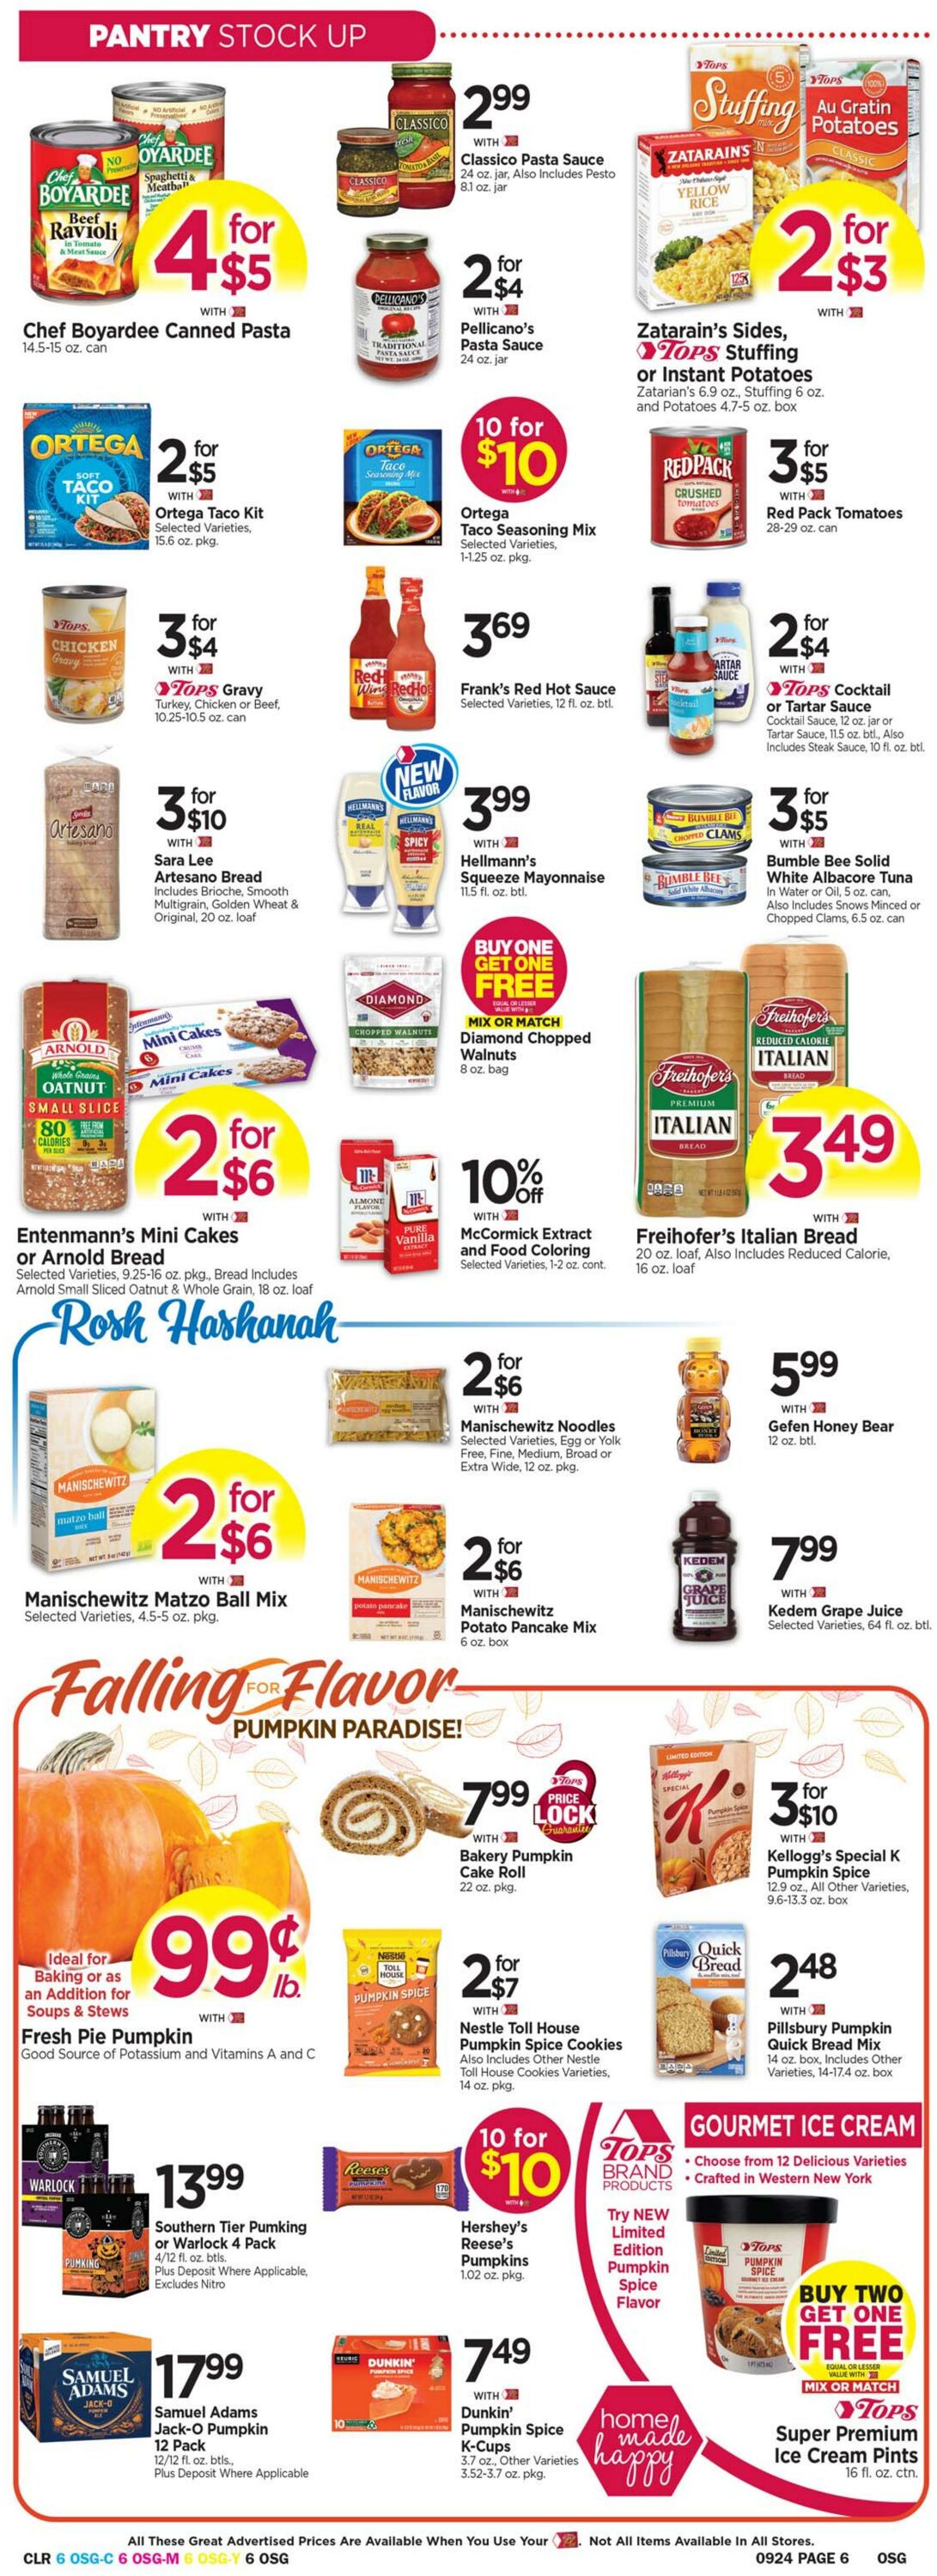 Weekly ad Tops Friendly Markets 09/18/2022 - 09/24/2022